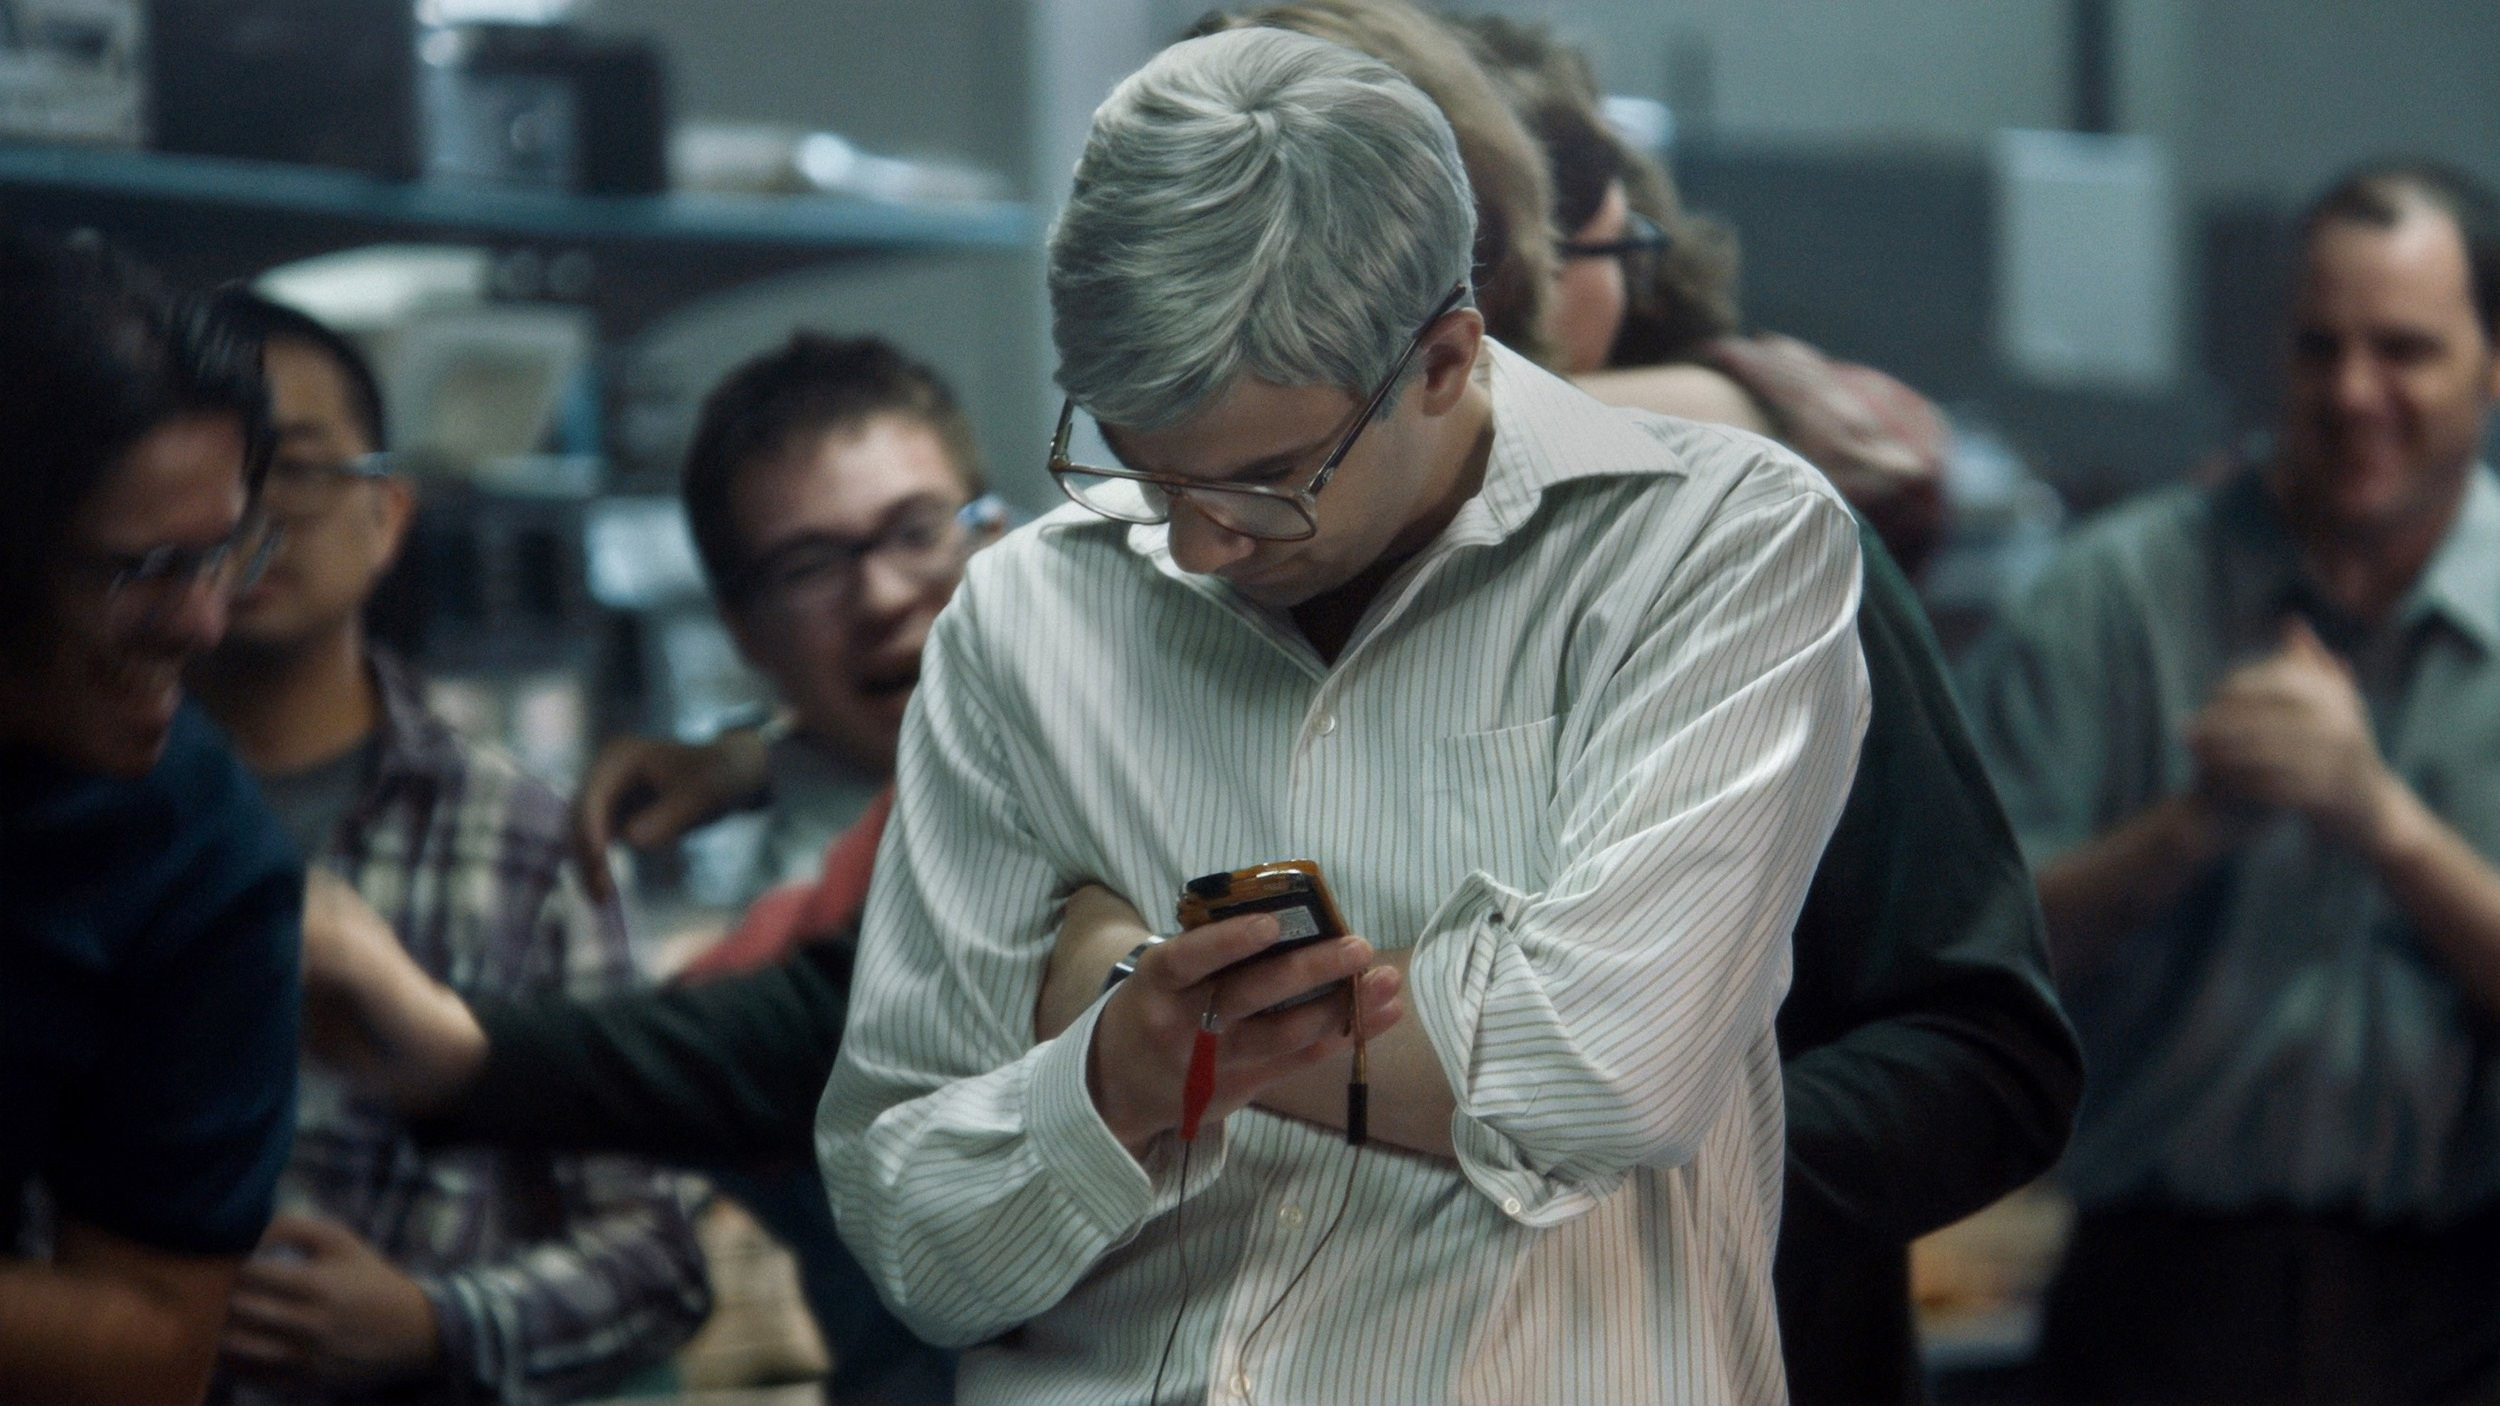 BlackBerry (The Movie) Trailer Shows The Rise And Fall Of The Phone Maker

